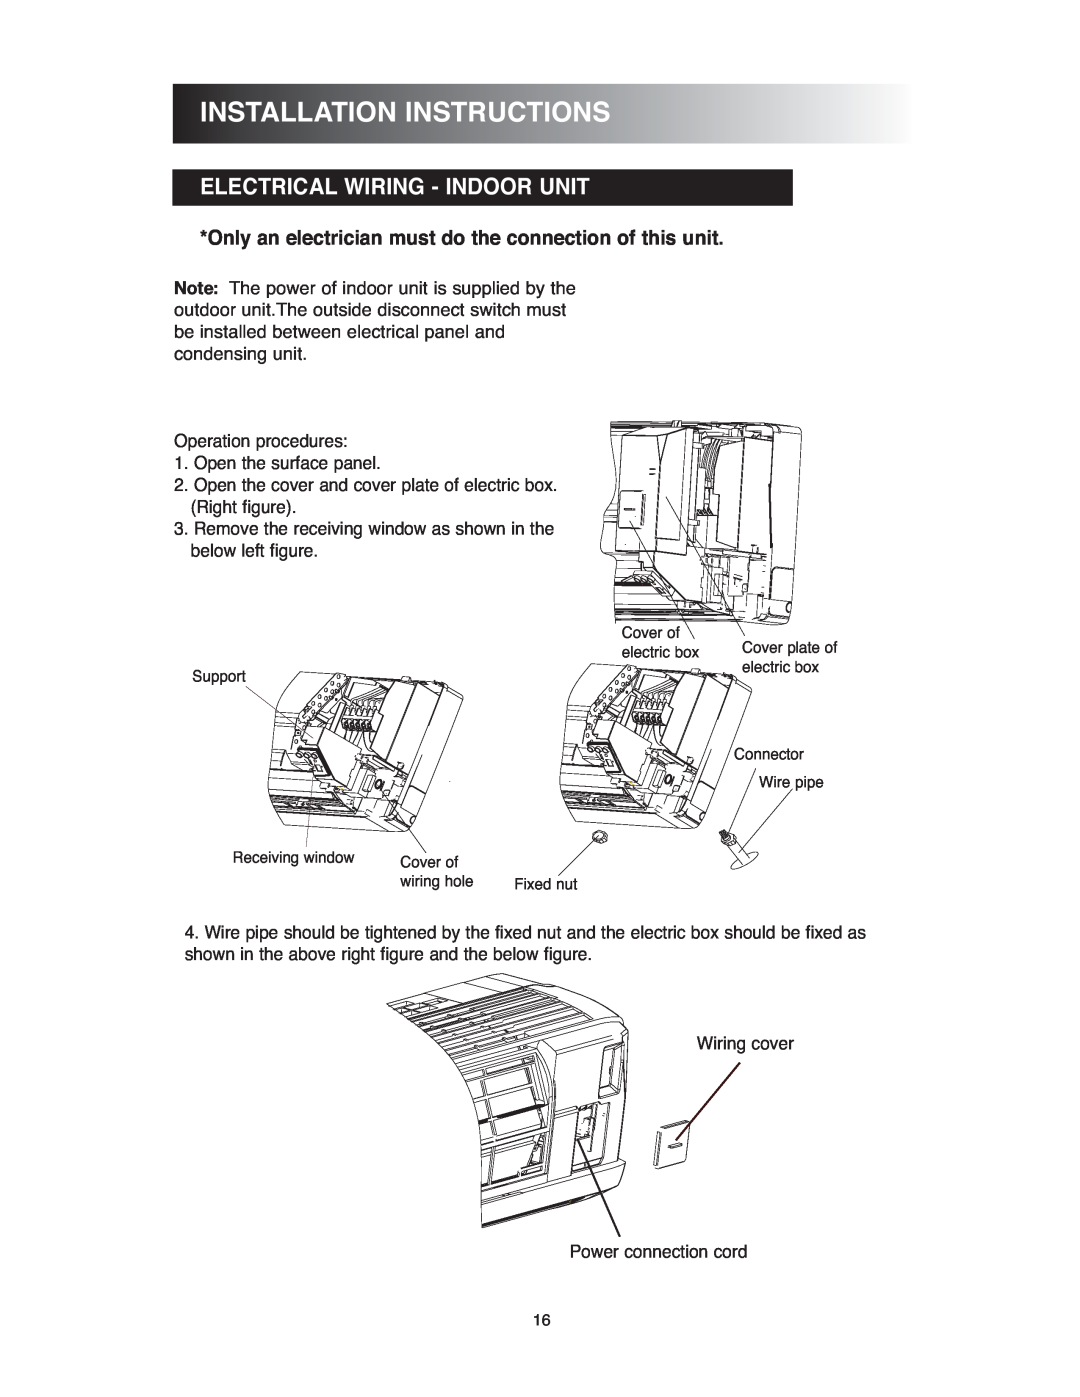 Sunrise Global 13-05020, 13-05024 owner manual Electrical Wiring - Indoor Unit, Installationinstructions 